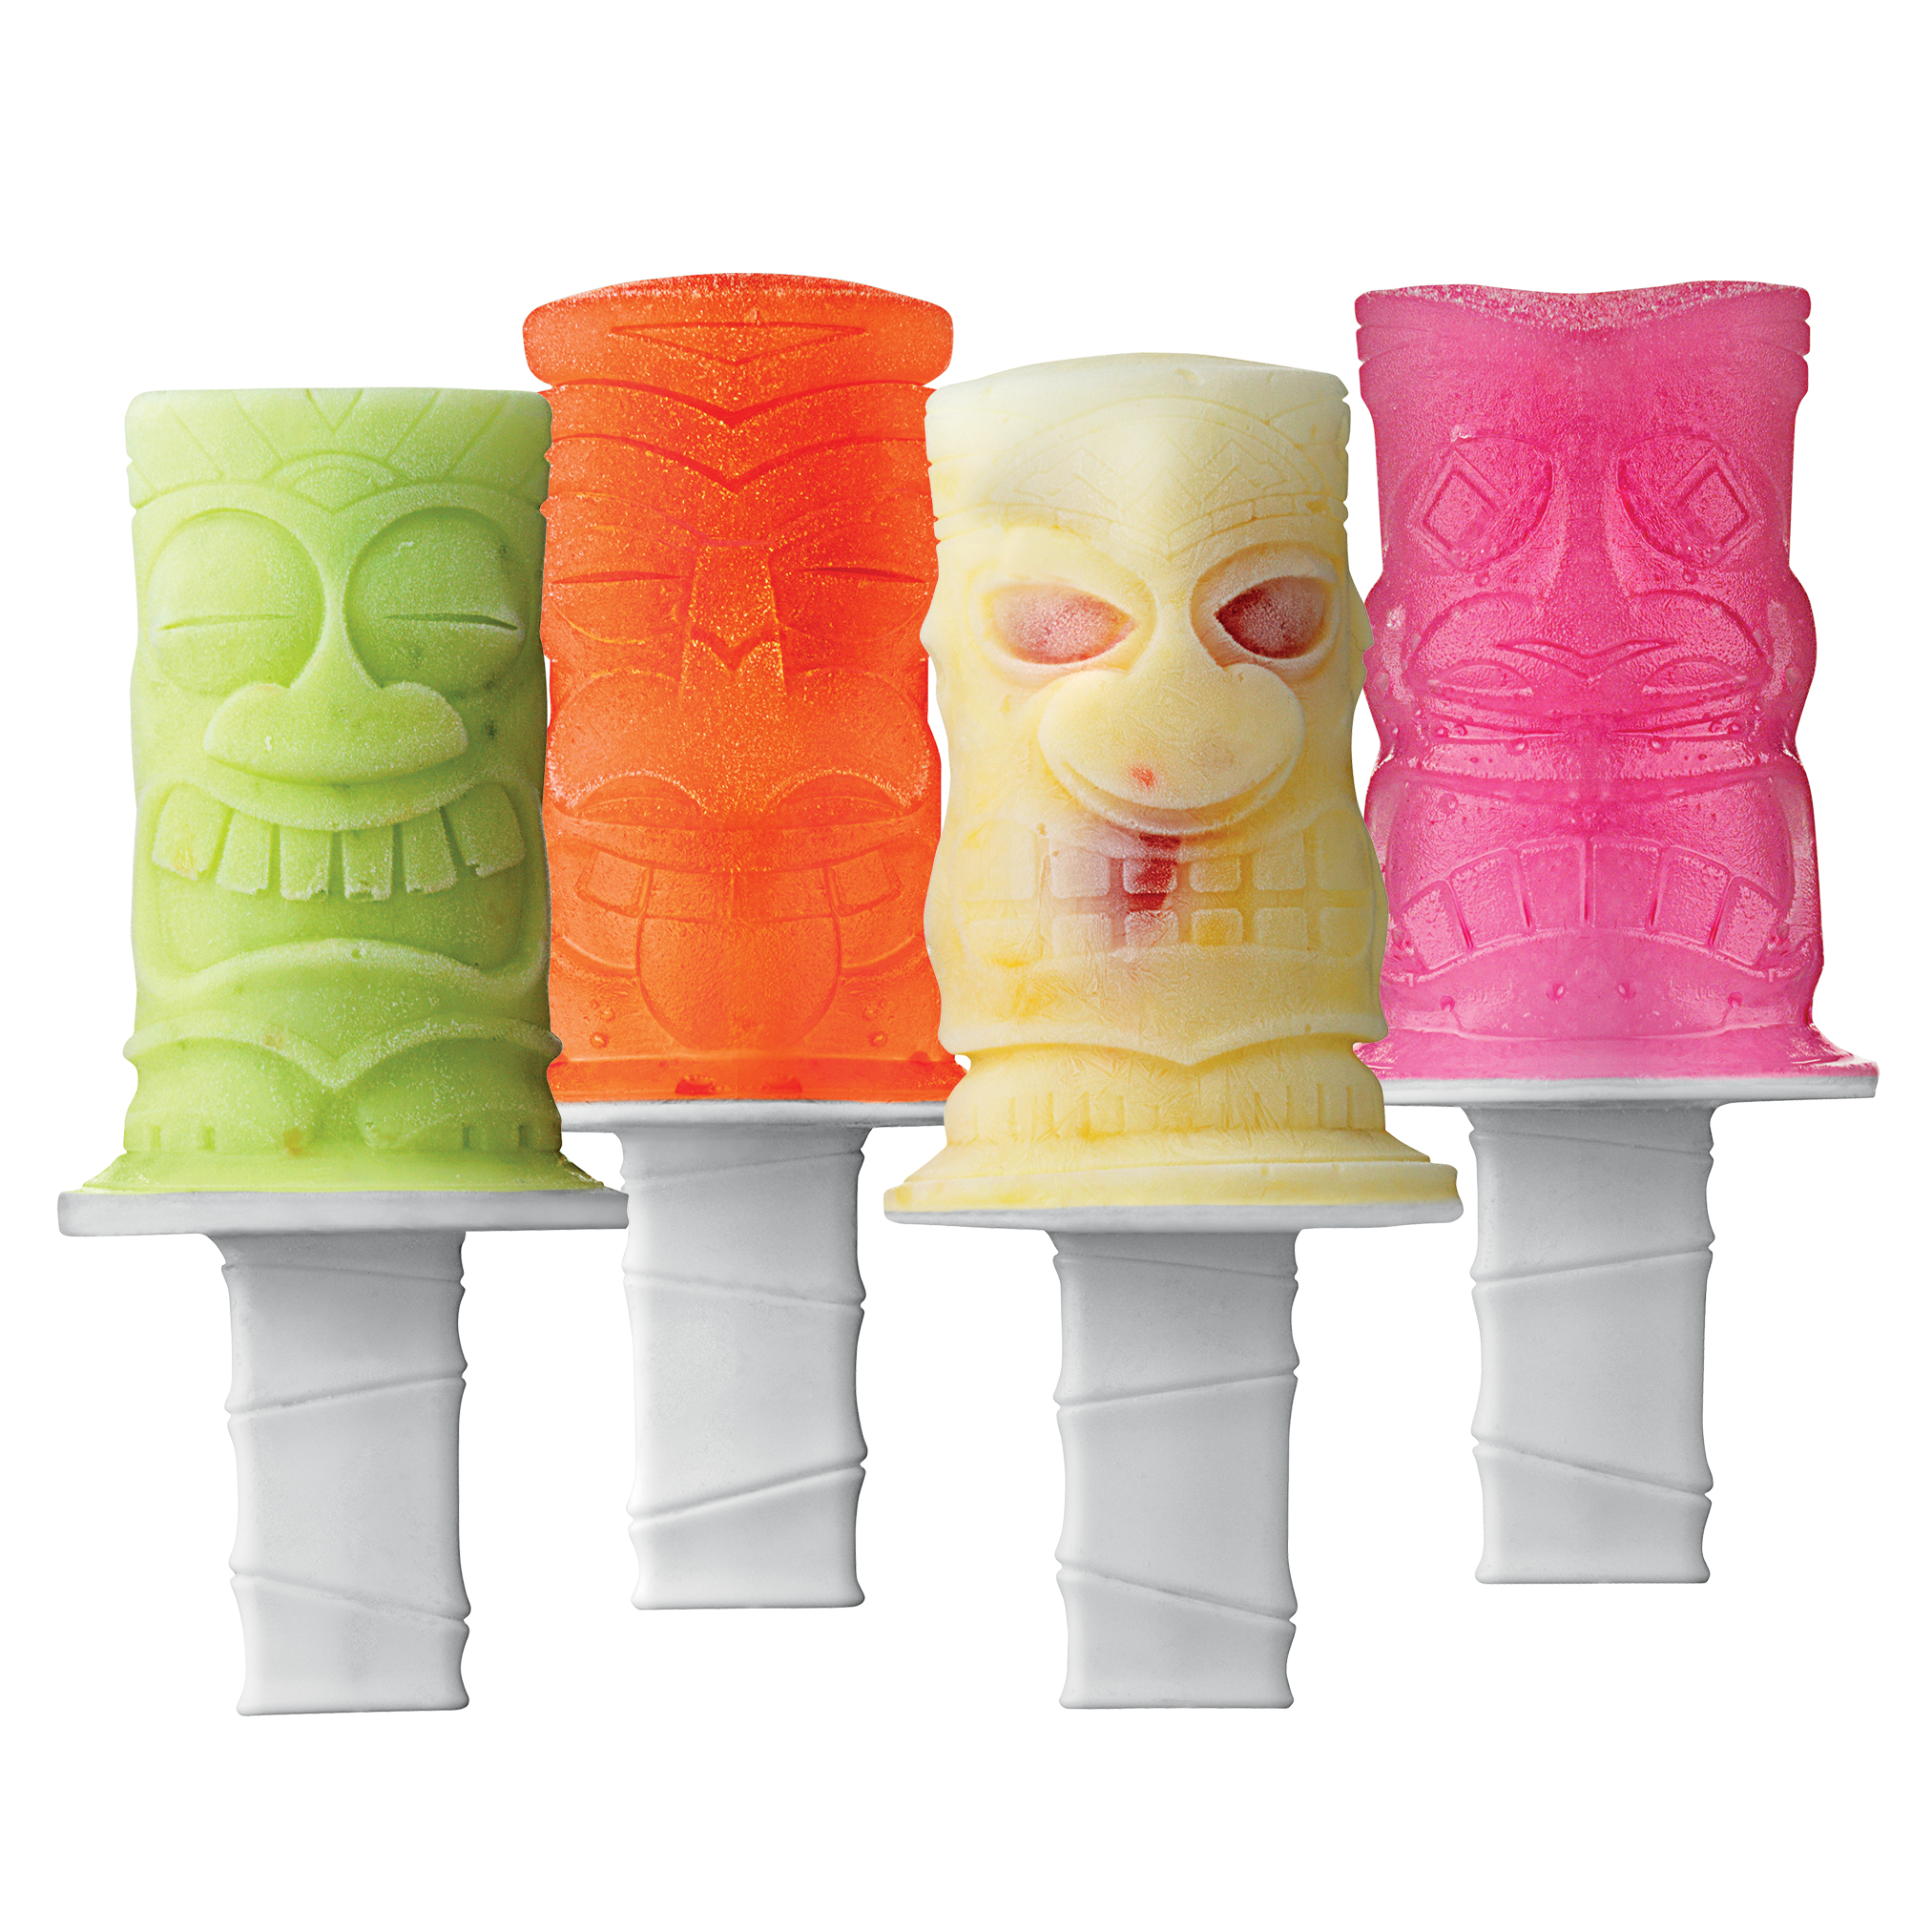 Tovolo Tikis Silicone Popsicle Molds Set with Base, Set of 4 - image 1 of 4